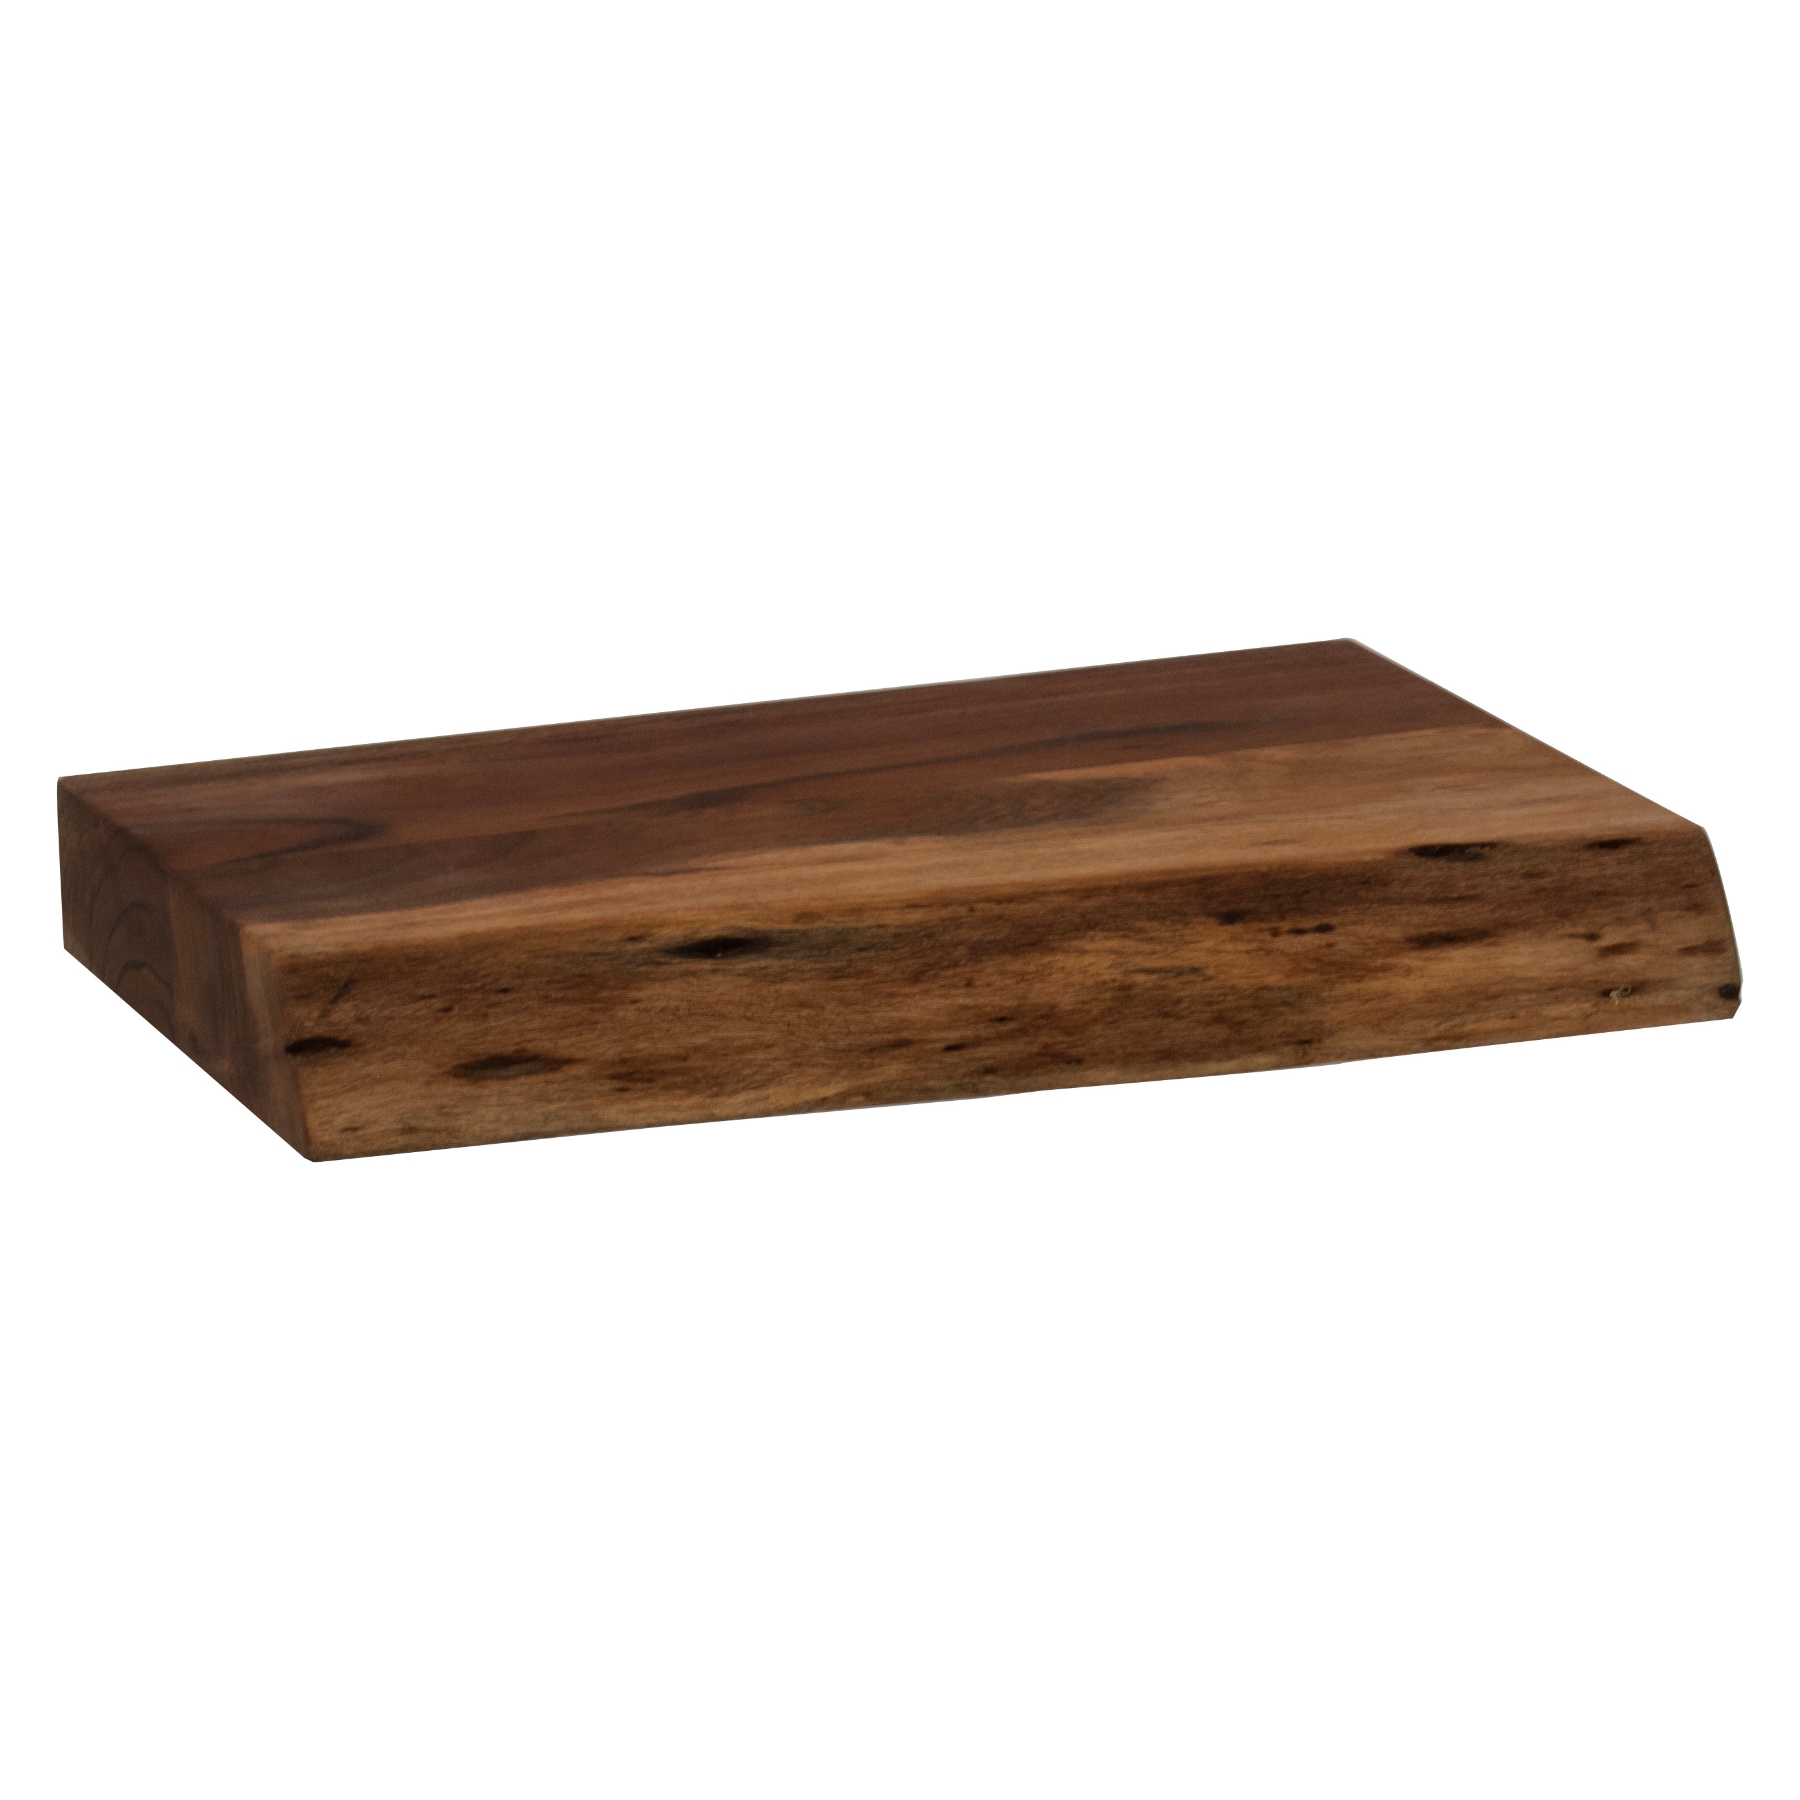 Chopping Board with Live Edge - Image 1